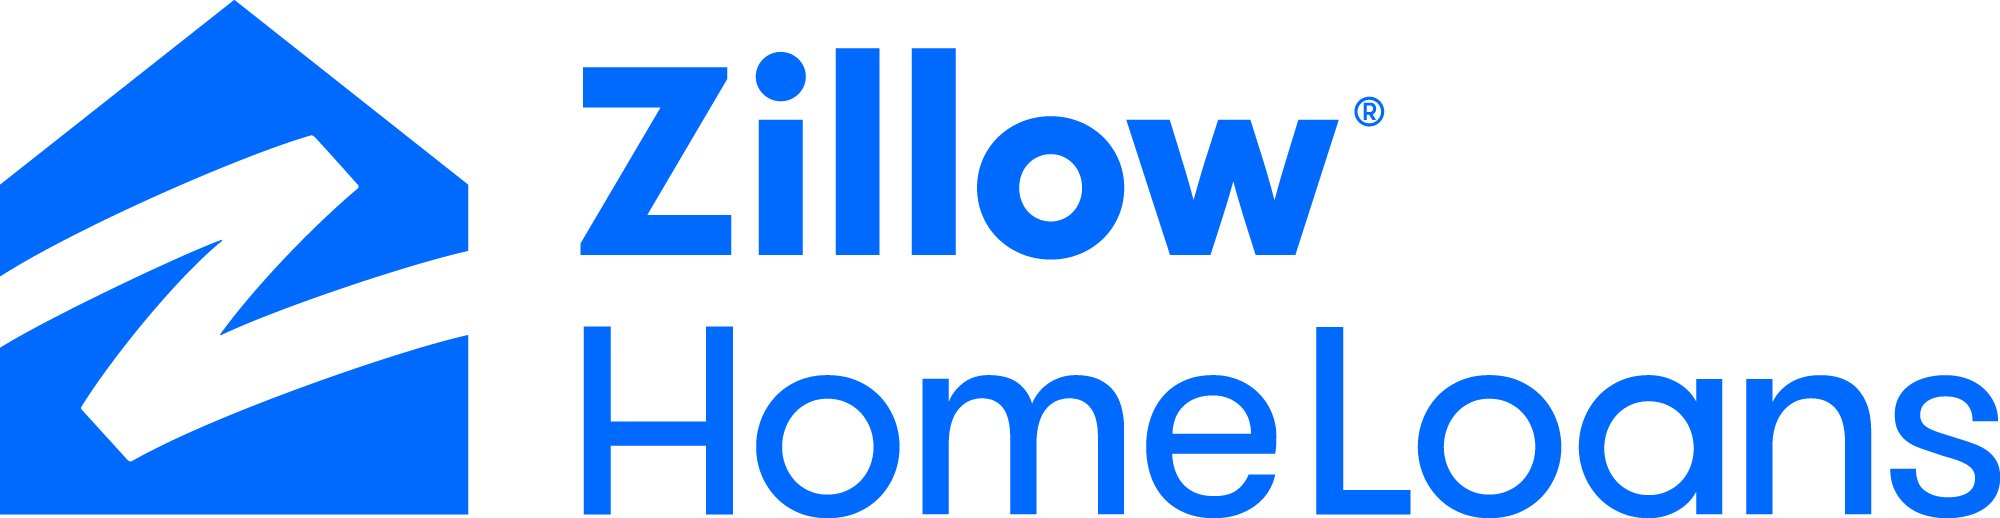 Zillow-HomeLoans_Stacked_Blue_RGB